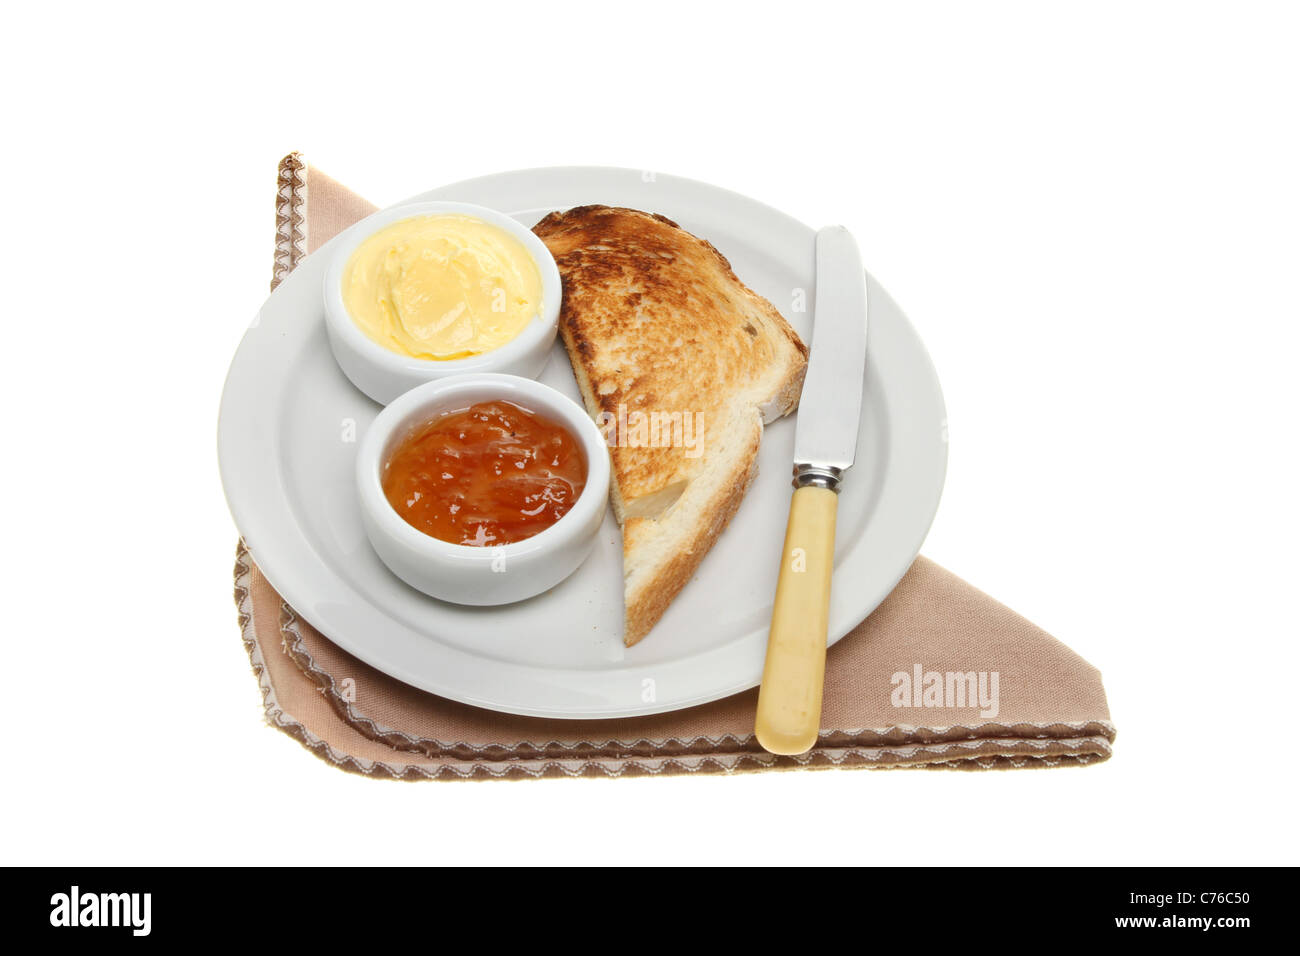 Toast, butter and marmalade on a plate with a knife and napkin isolated against white Stock Photo